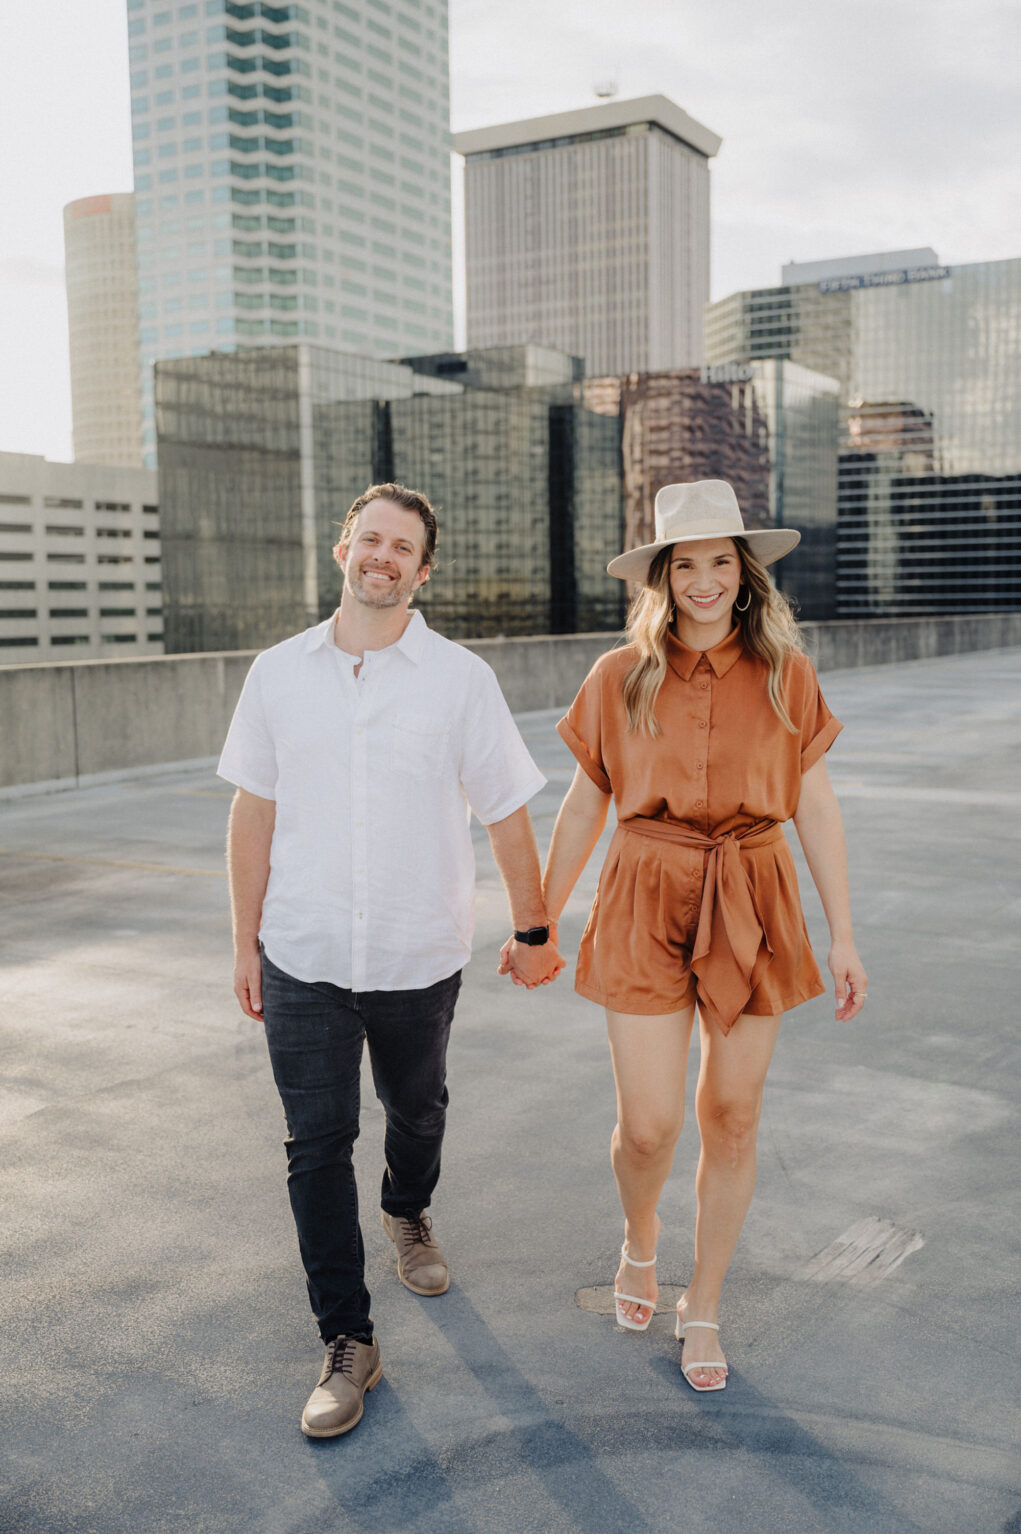 Downtown Tampa Rooftop Engagement Shoot | McNeile Photography